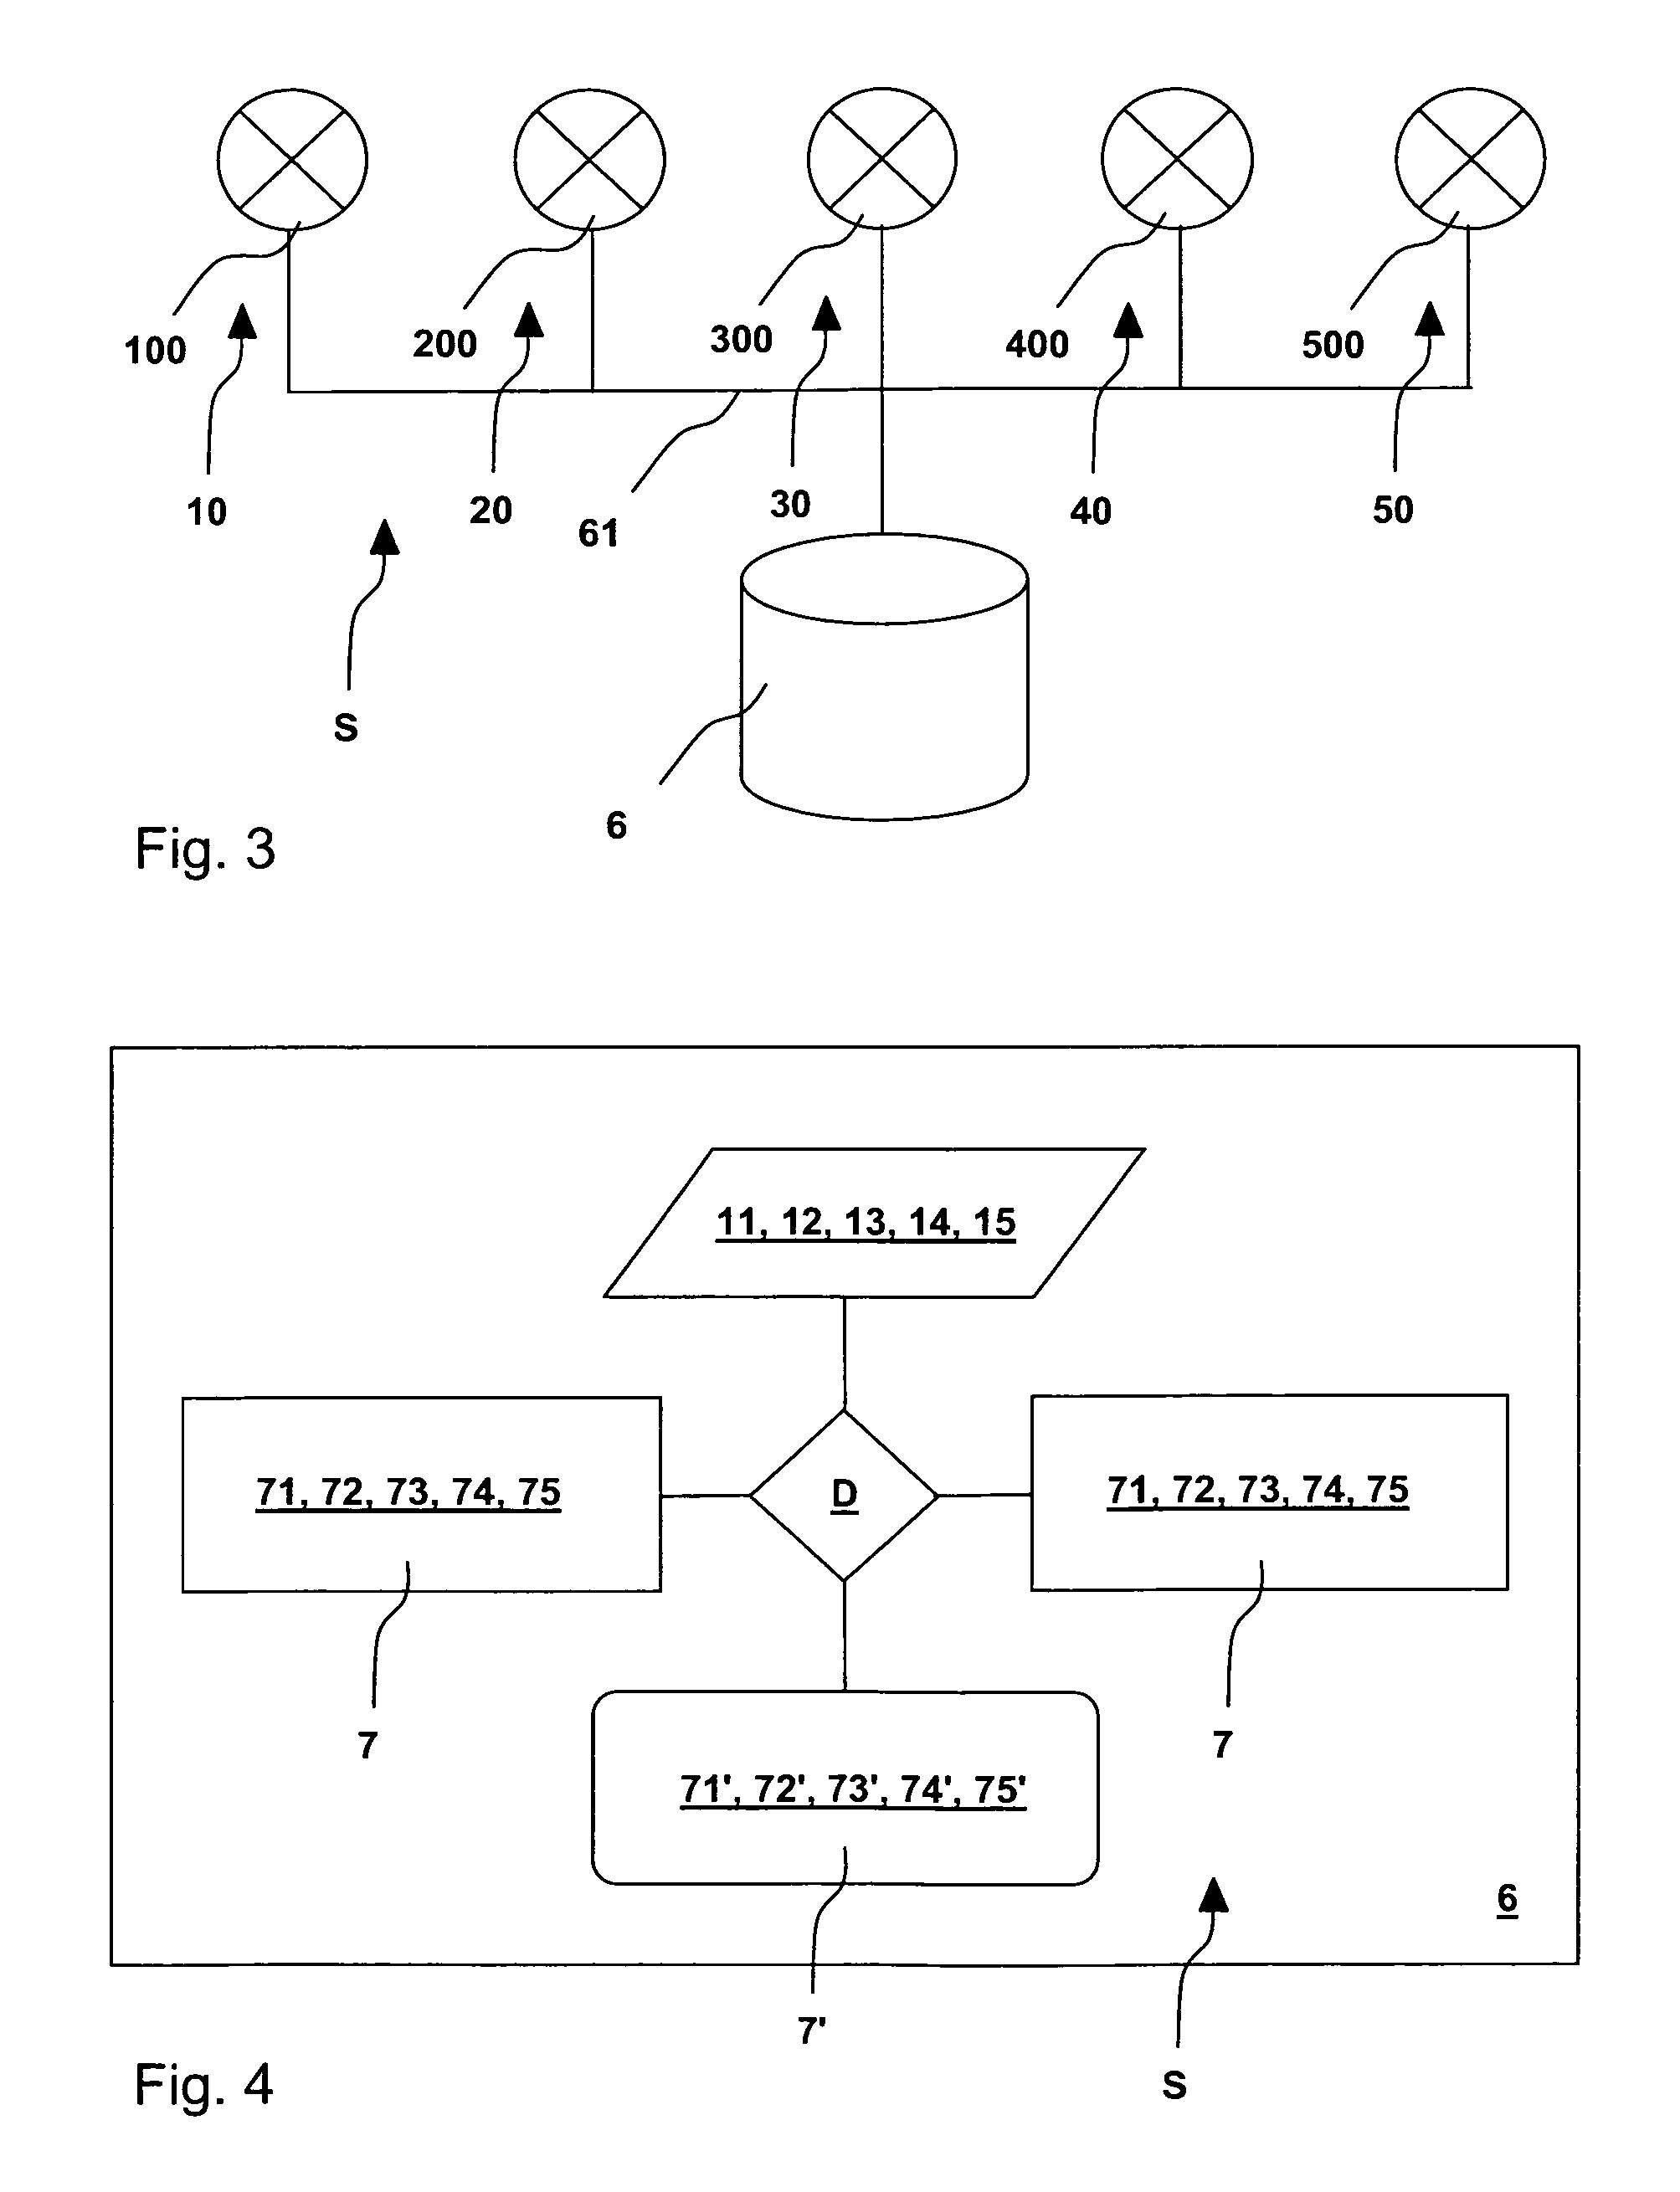 Method of real-time scheduling of processes at distributed manufacturing sites